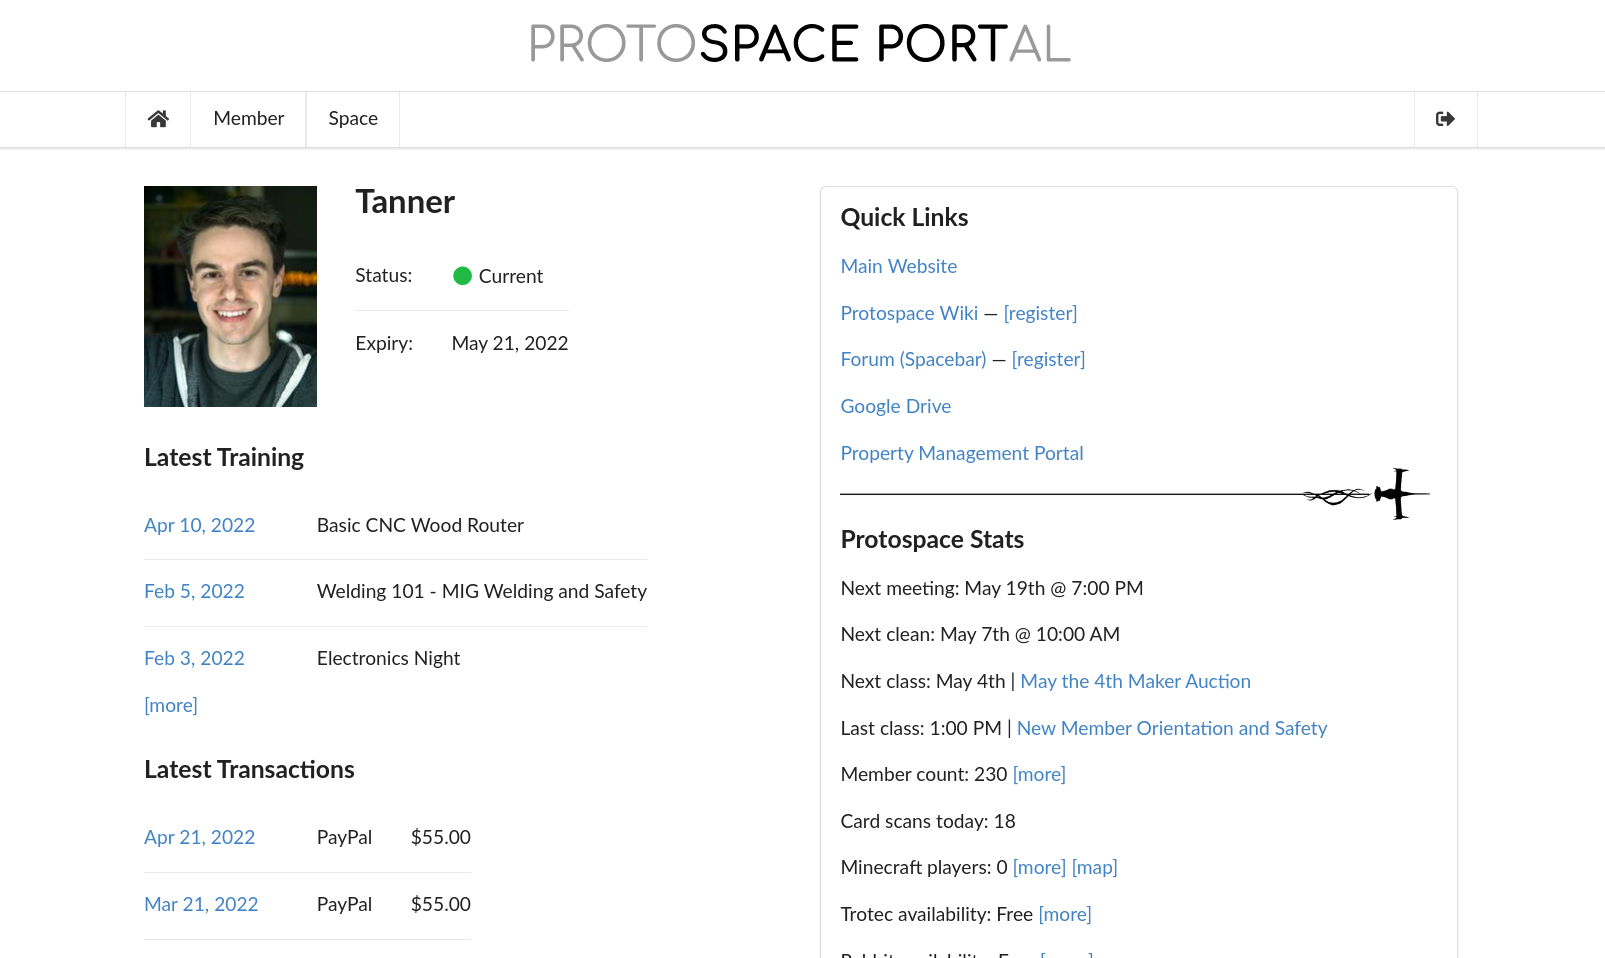 a screenshot of spaceport's home page. a photo of me to the left, below that my latest training and transactions. links and stats related to Protospace to the right.